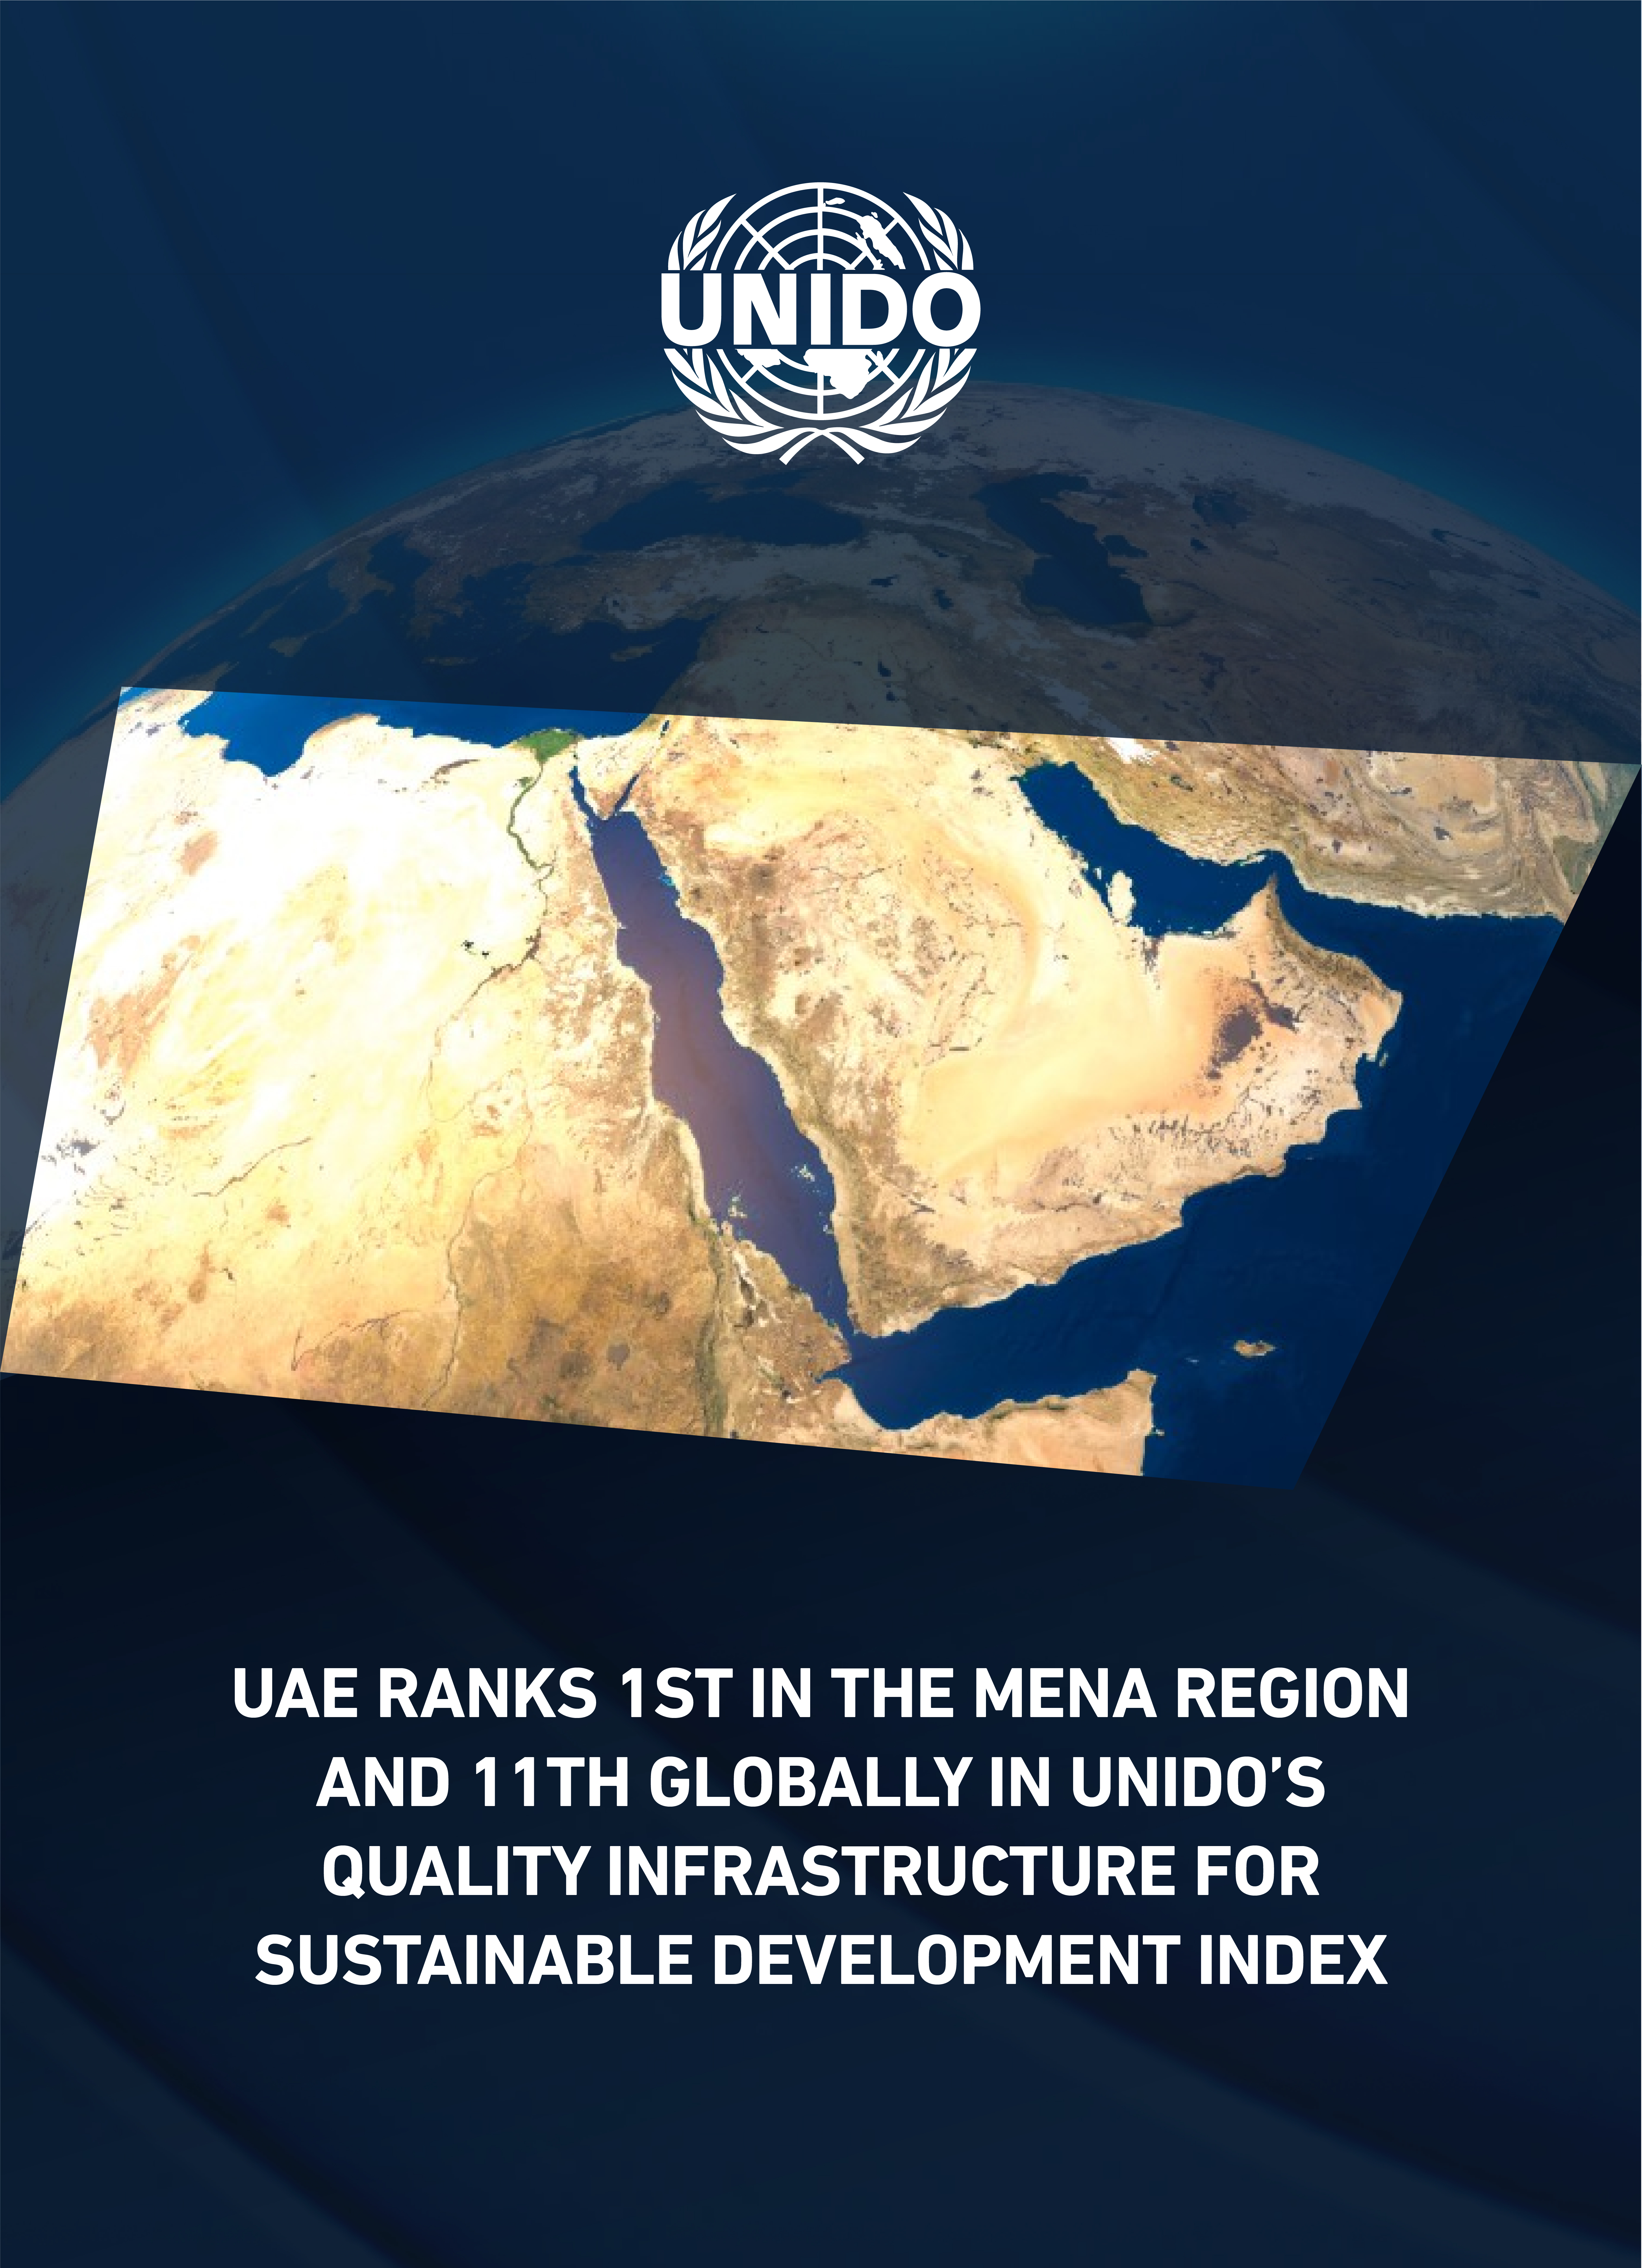 The UAE Ranks First in the MENA Region and 11th Globally in UNIDO’s Quality Infrastructure for Sustainable Development Index